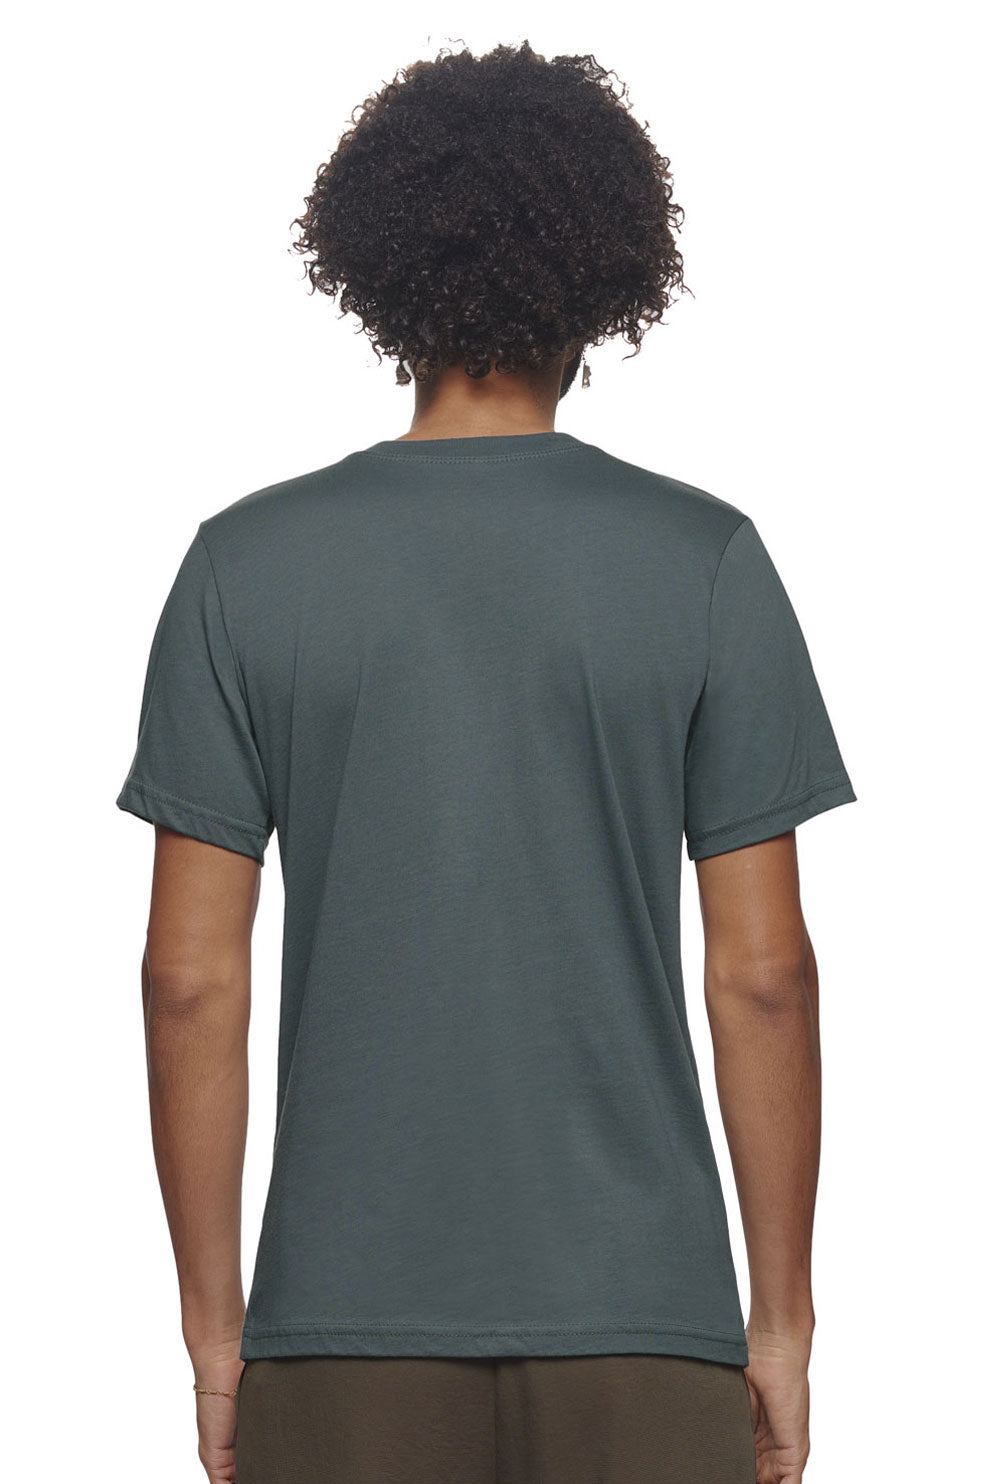 Expert Brand Wholesale Unisex Organic Cotton Tee Made in USA SC801U Carbon Image 2#carbon